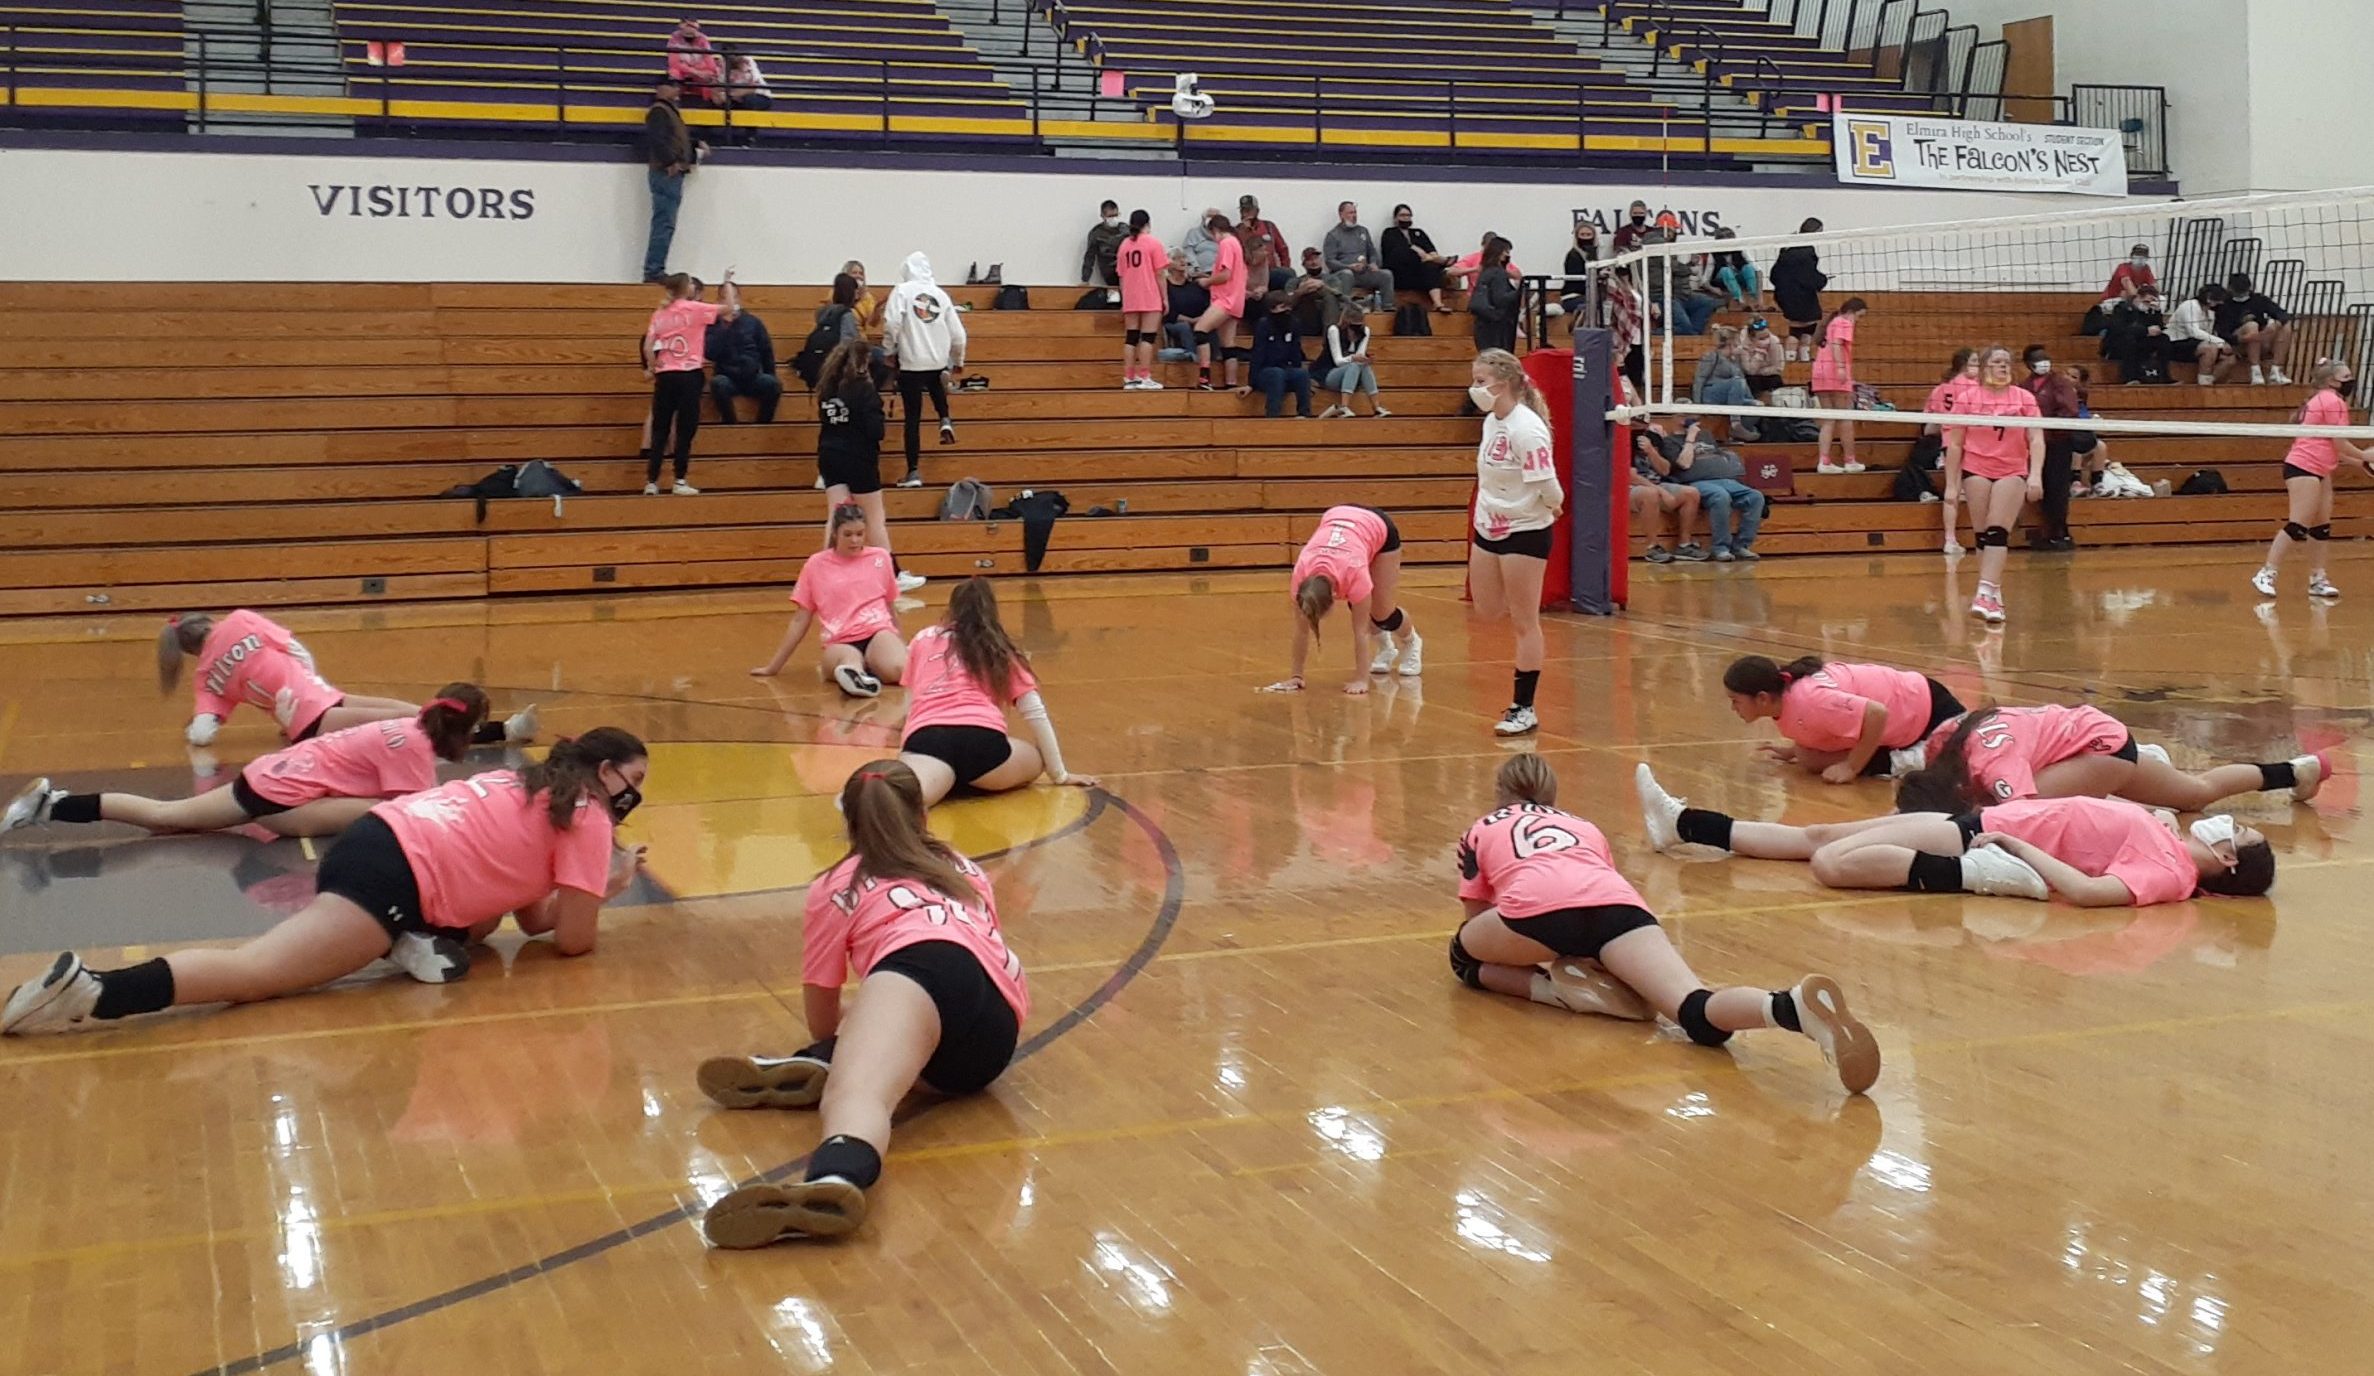 Pictured: Elmira Falcons (varsity) warming up for game taken by: Kelsey Hemple